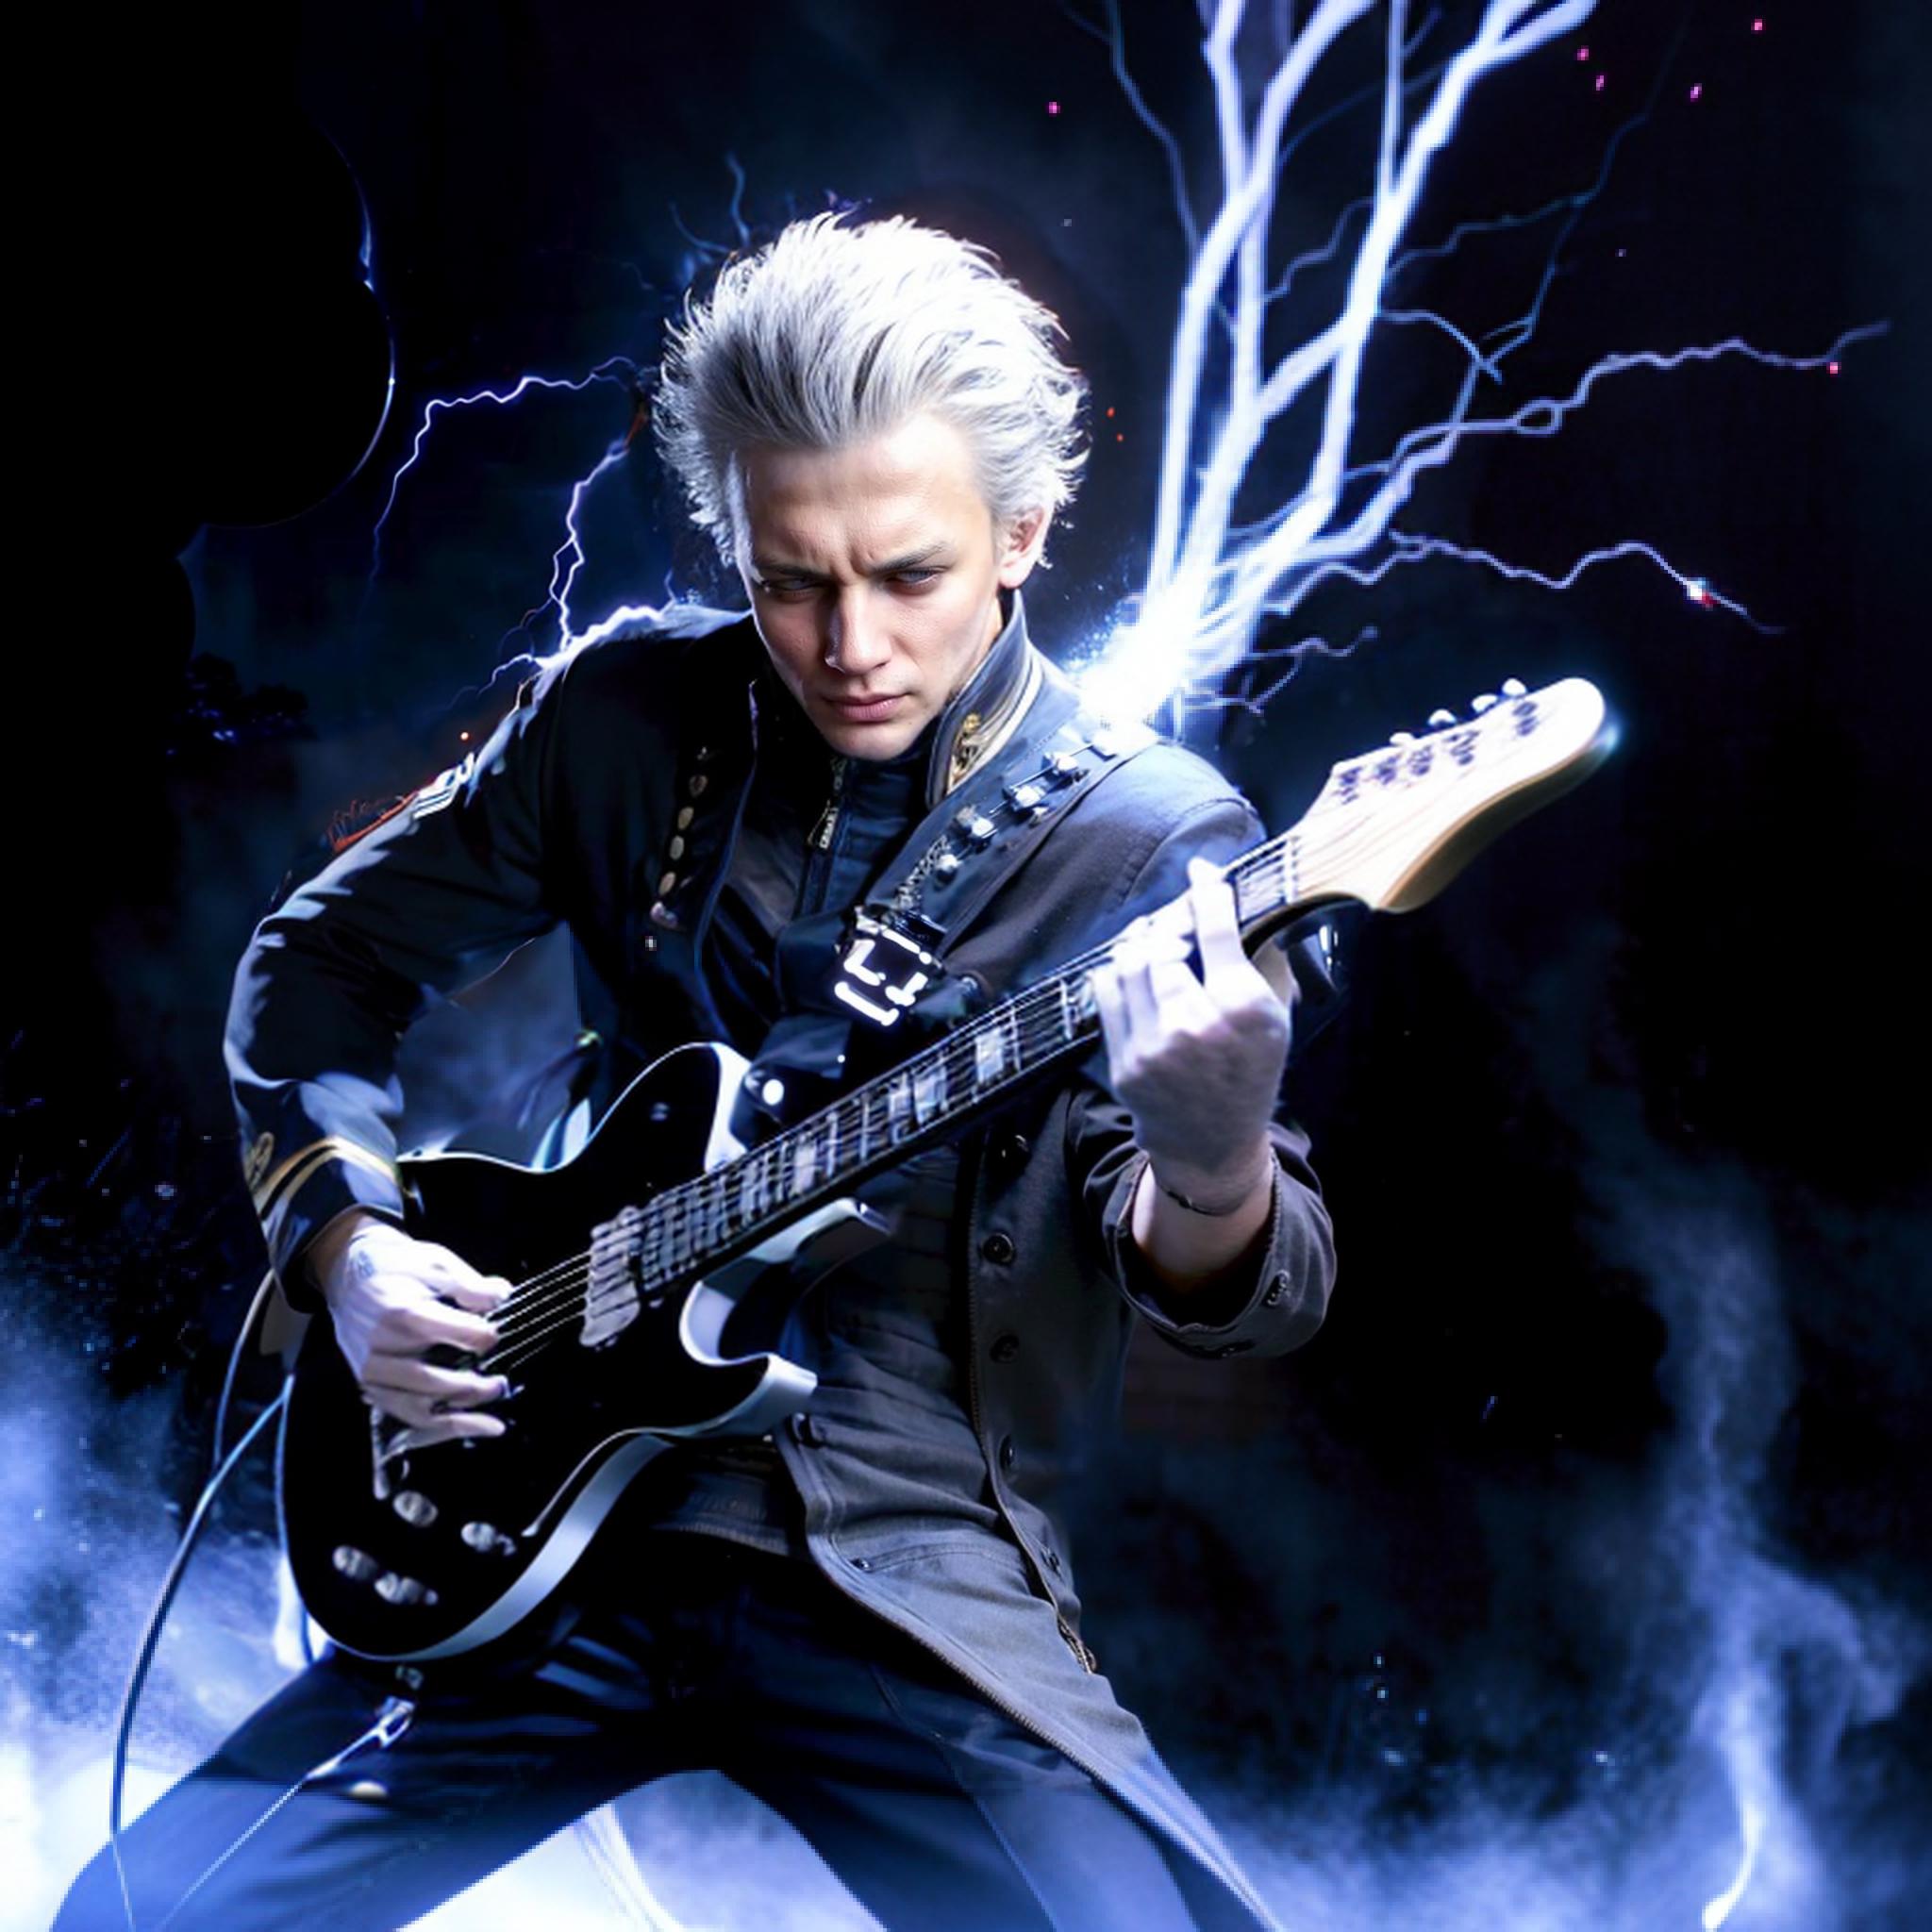 Man Playing Guitar with Lightning Bolts Behind Him